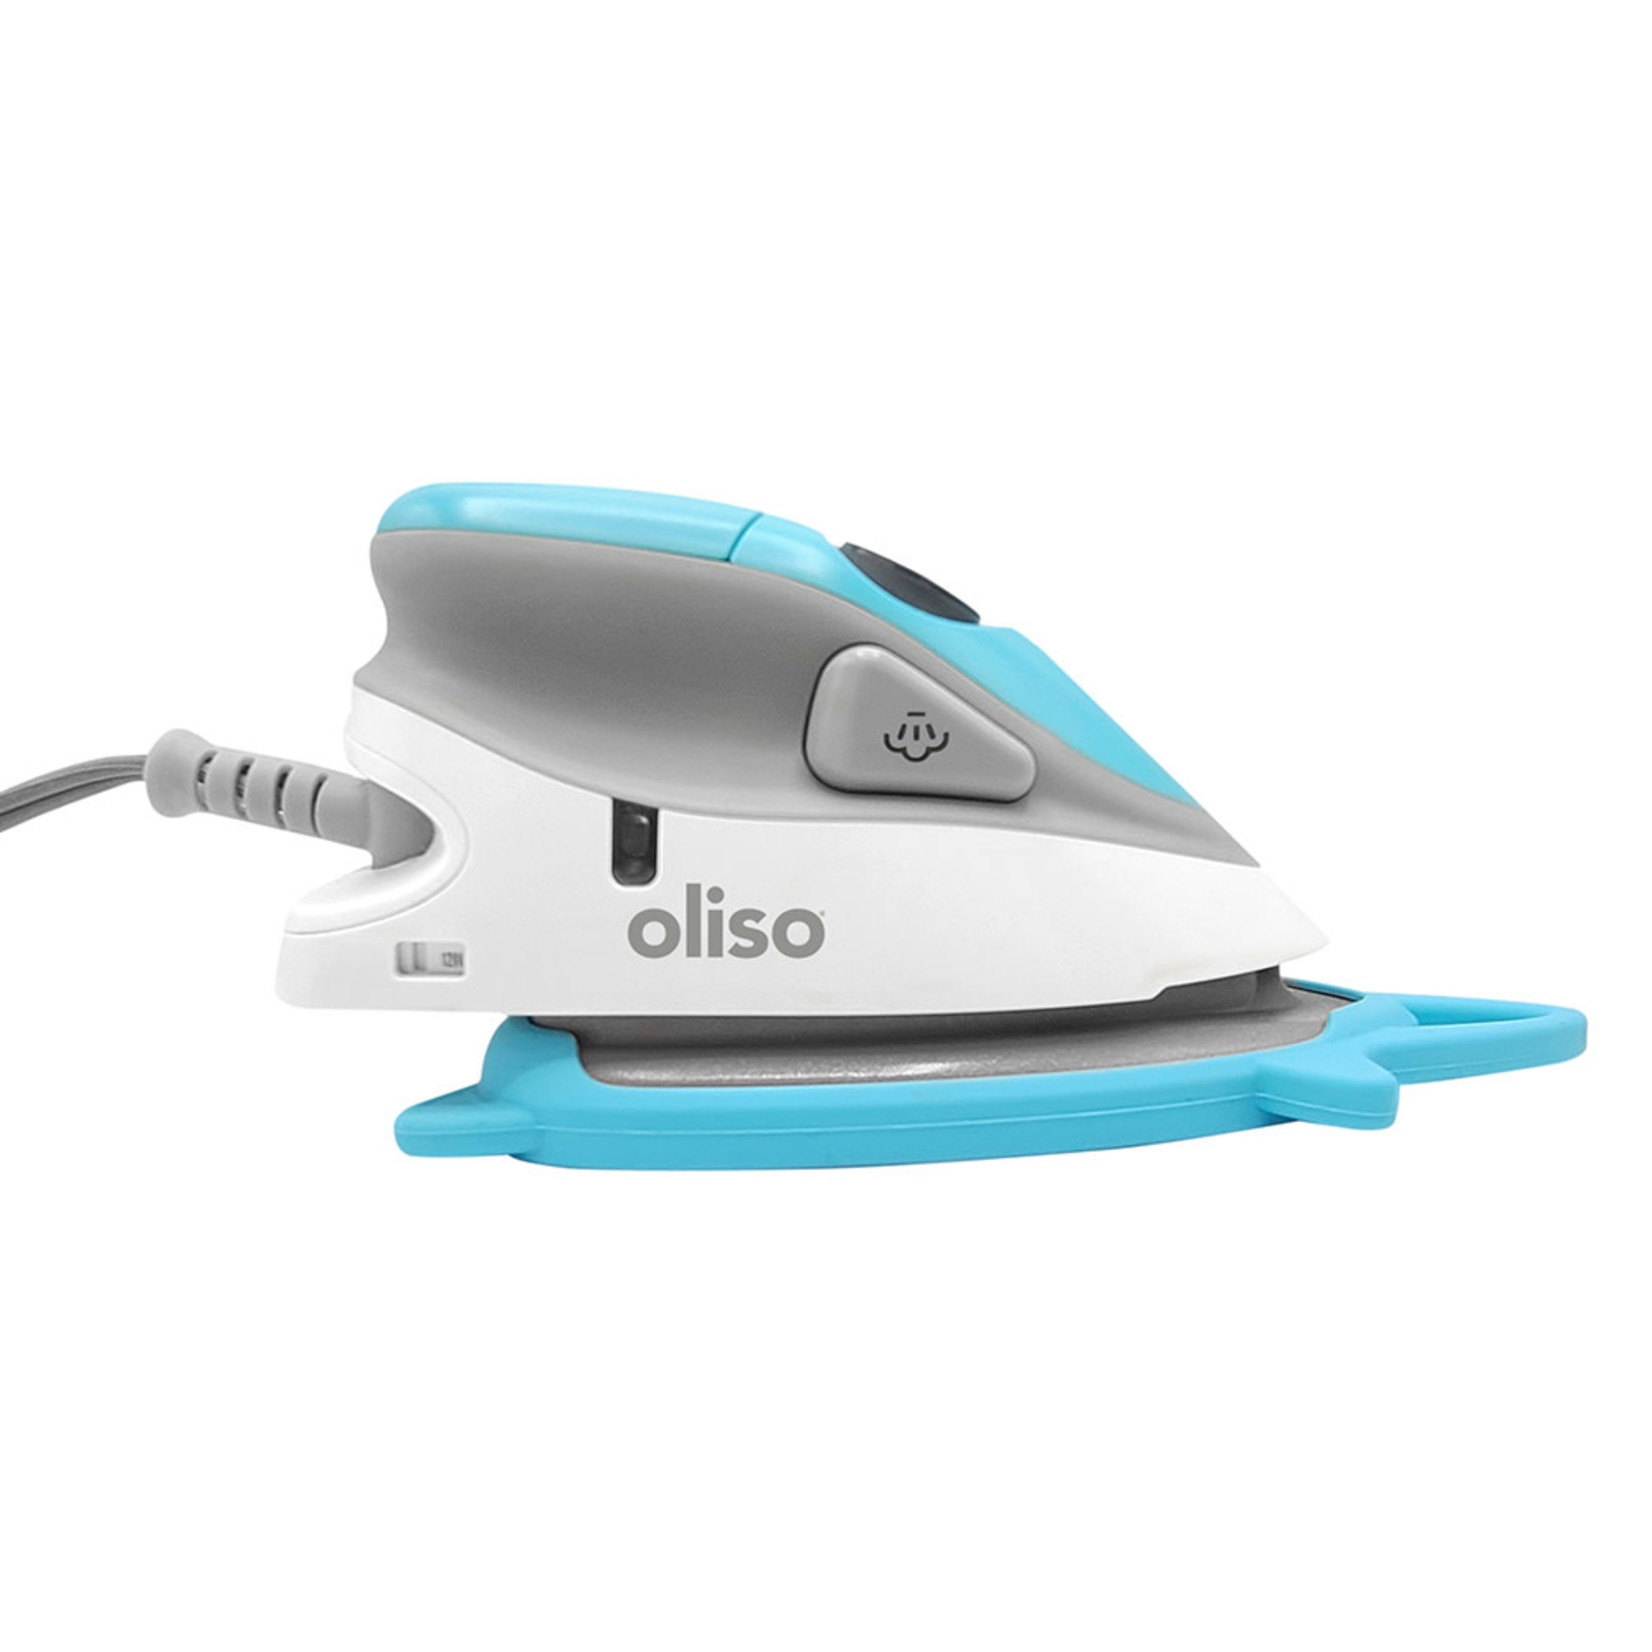 Oliso OLISO M2Pro Mini Project Iron with Solemate